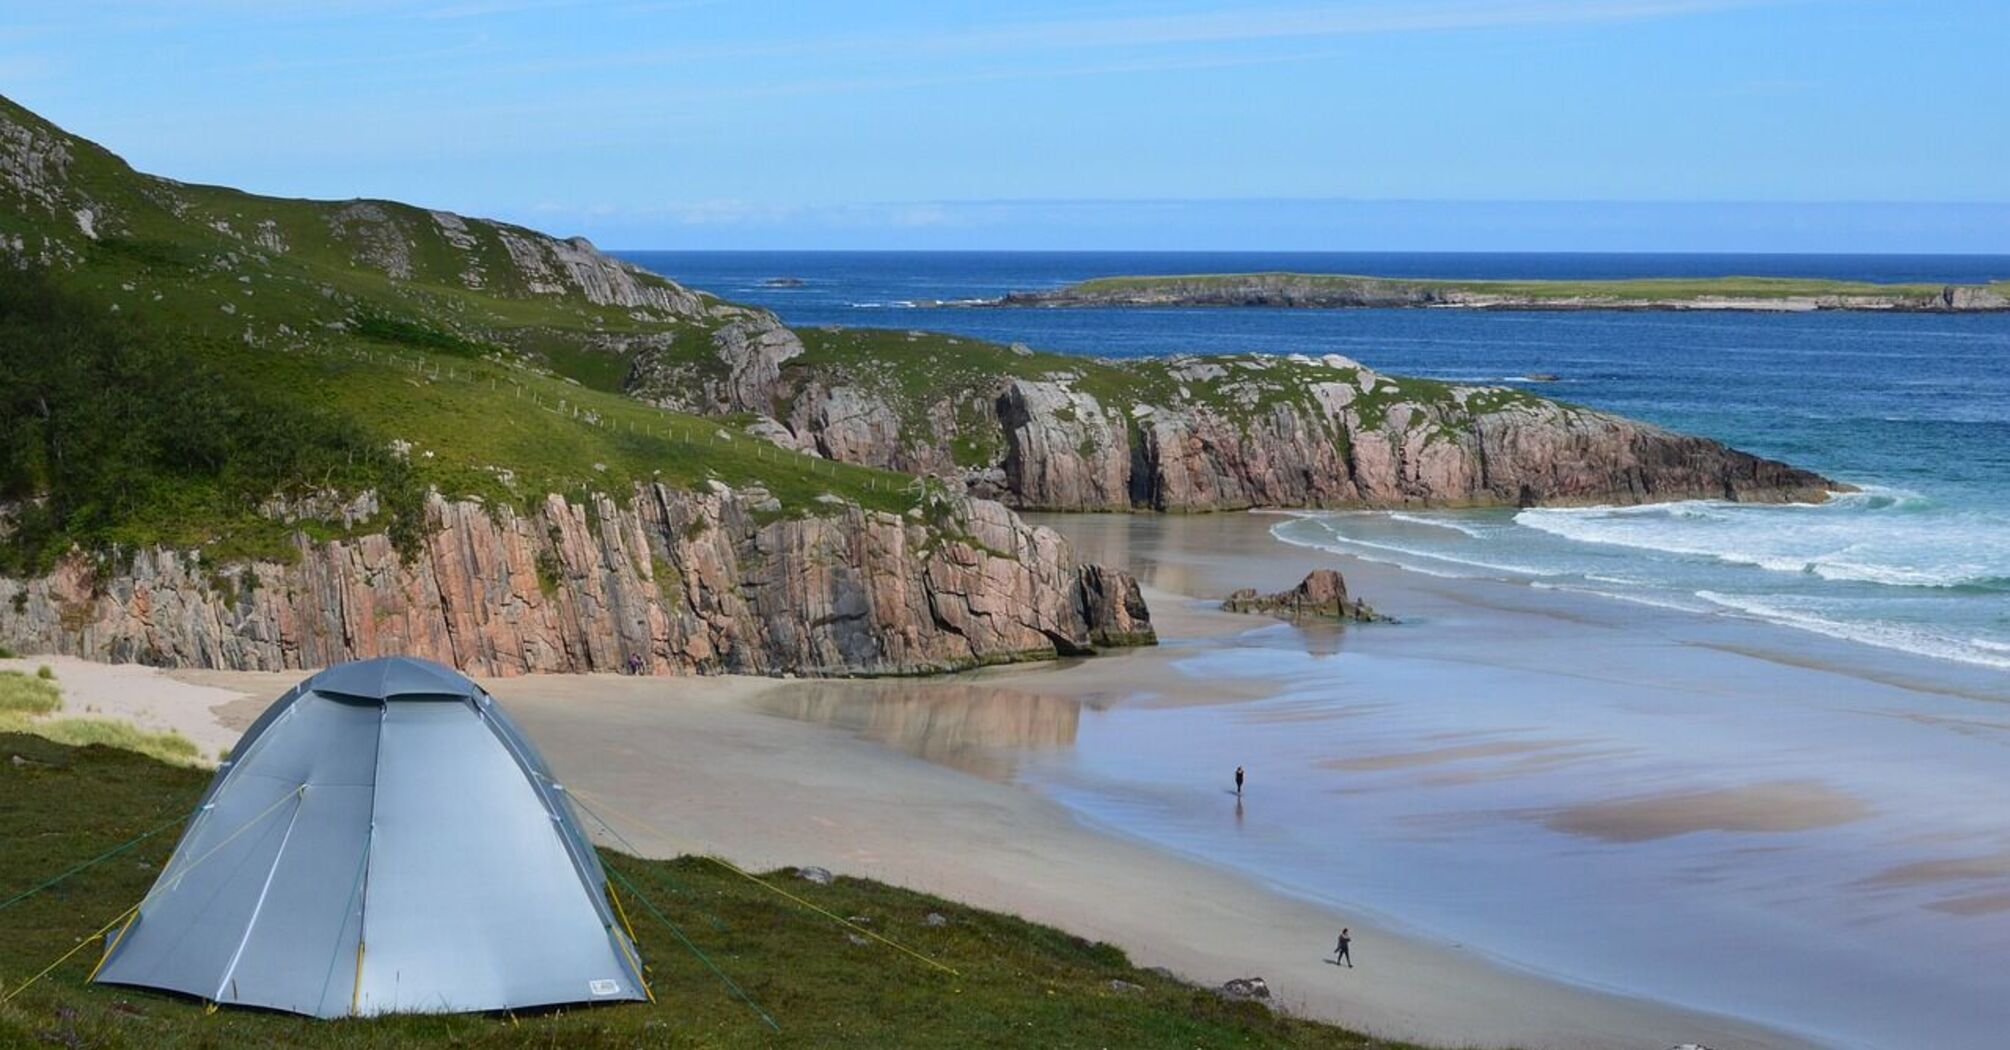 Tips for wild camping in Scotland when planning an unforgettable outdoor vacation